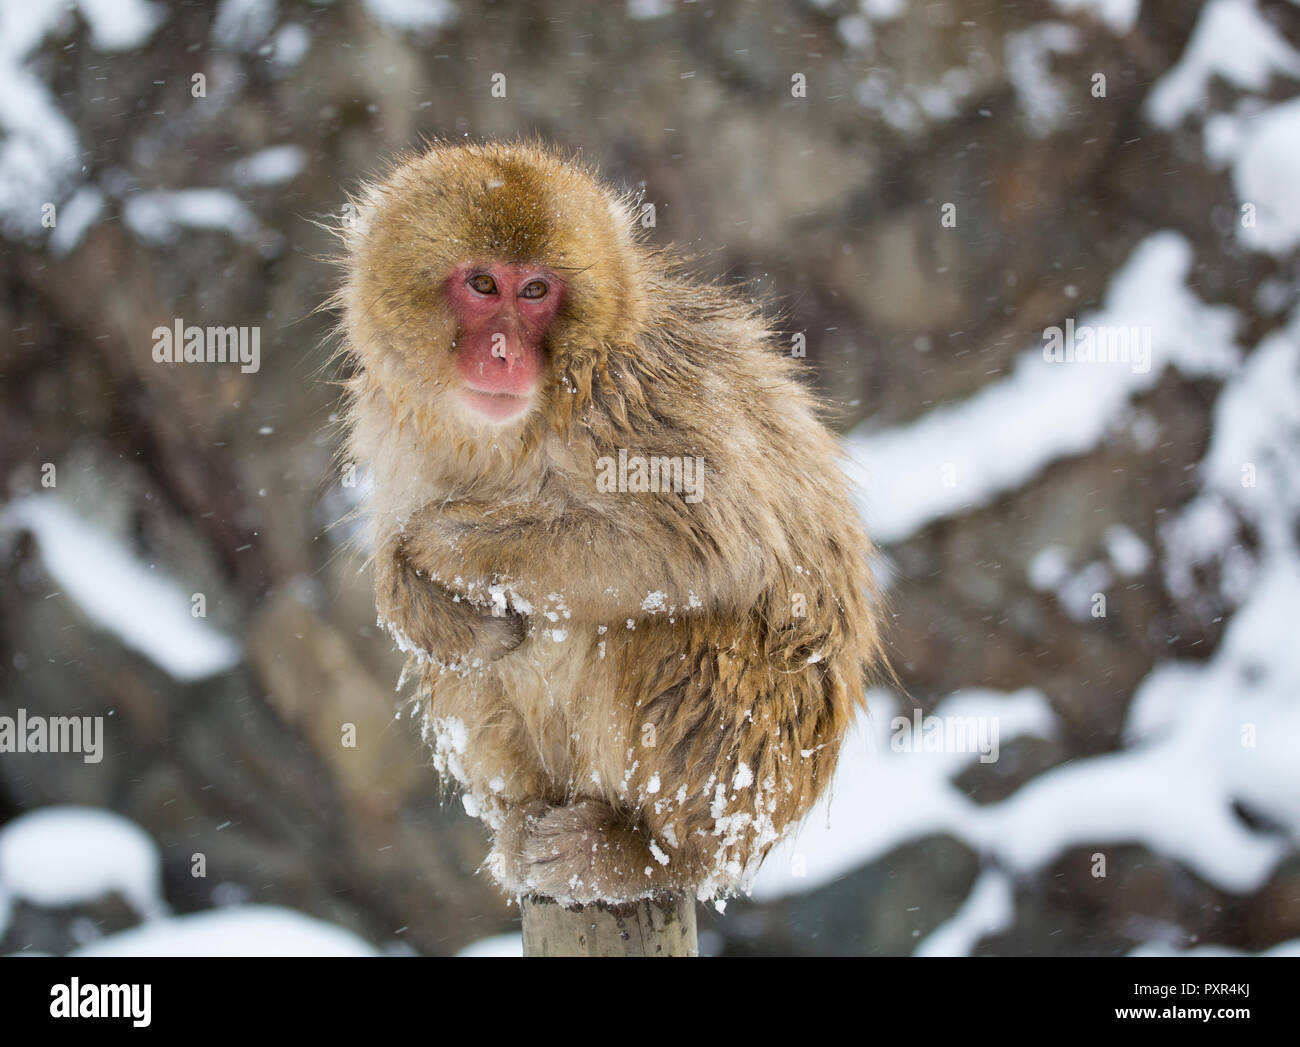 Macaque monkey in the snow near a hot pool, Japan Stock Photo